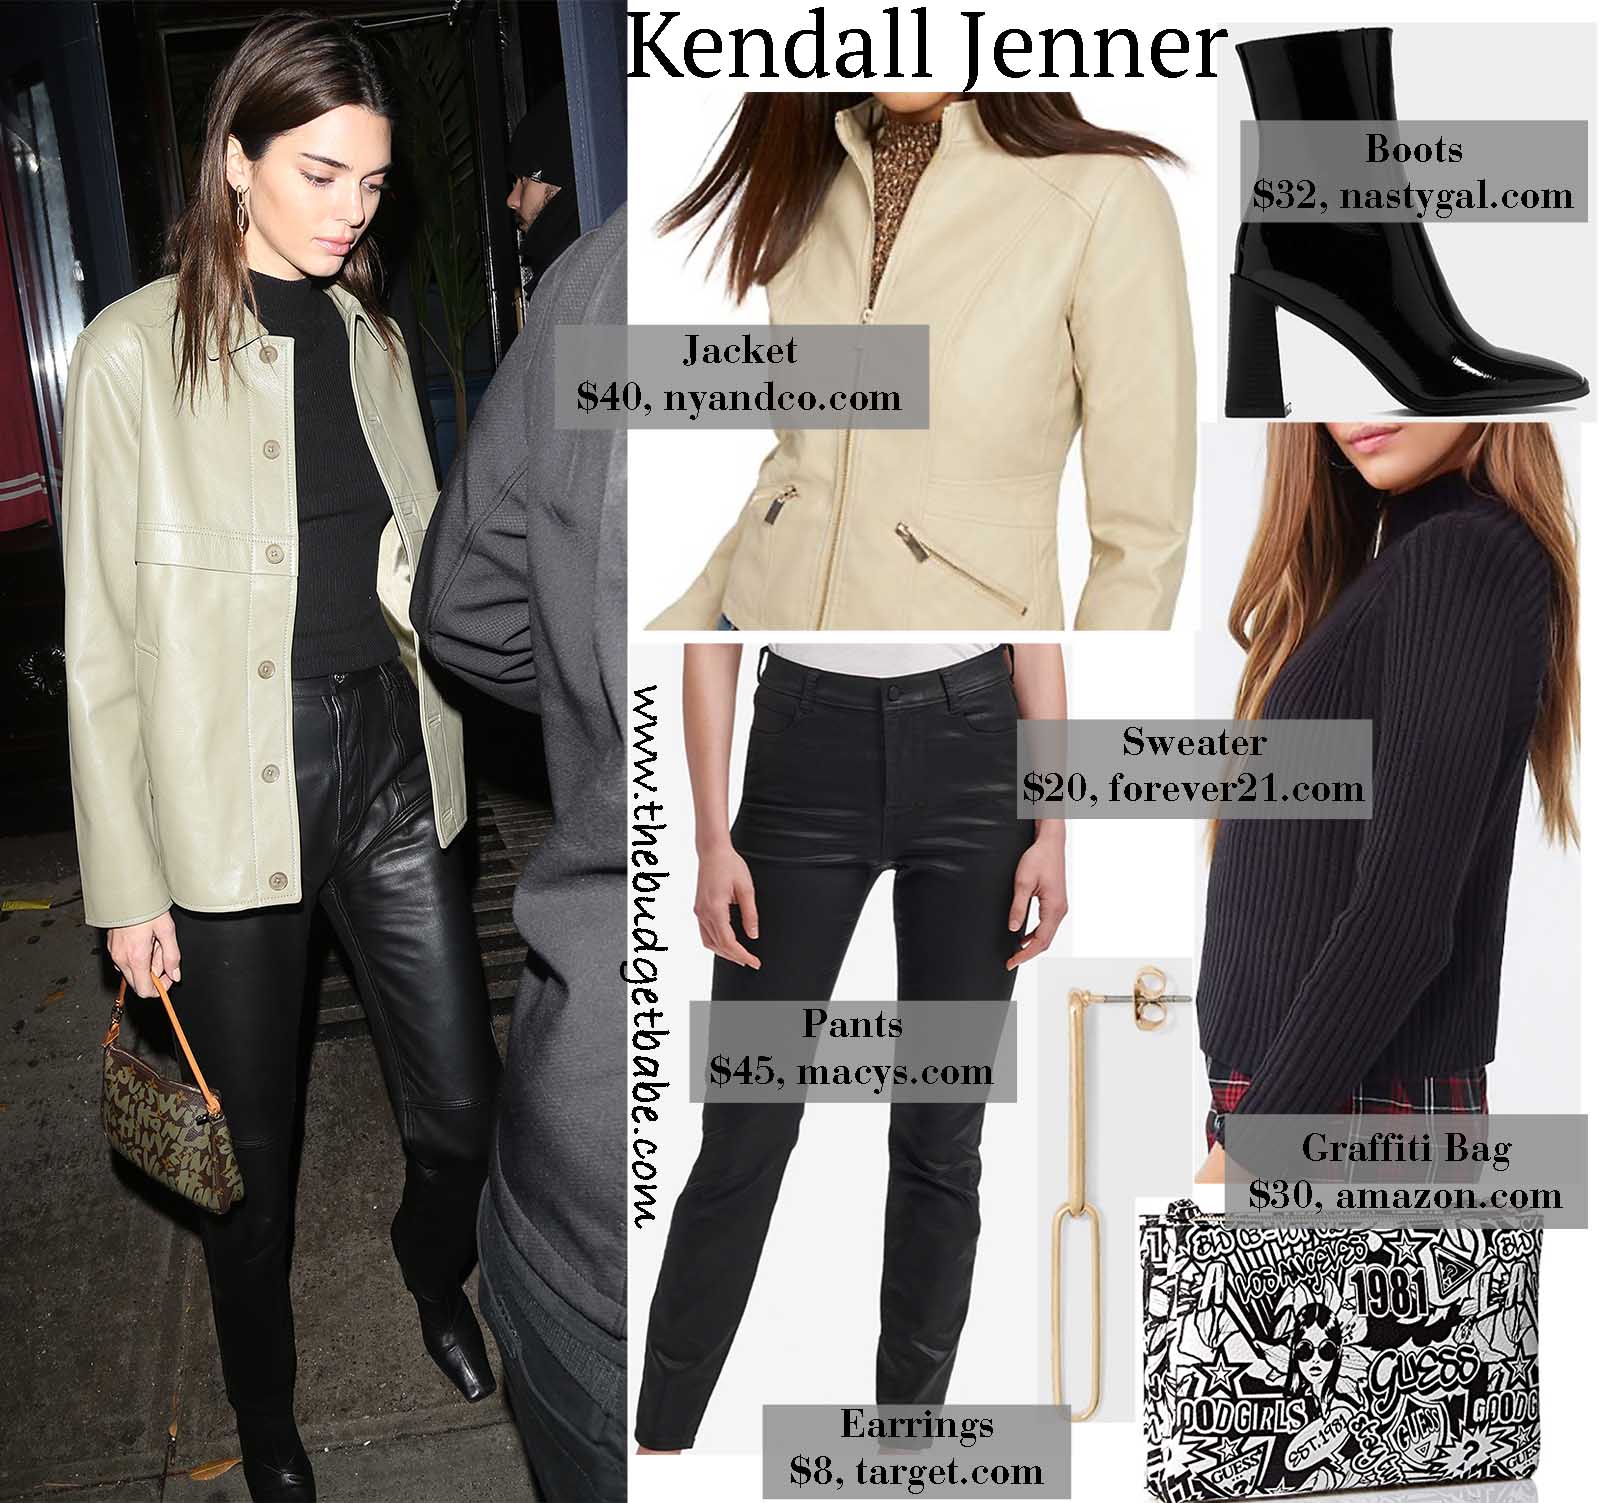 Kendall Jenner keeps it stylish and simple in black and cream!